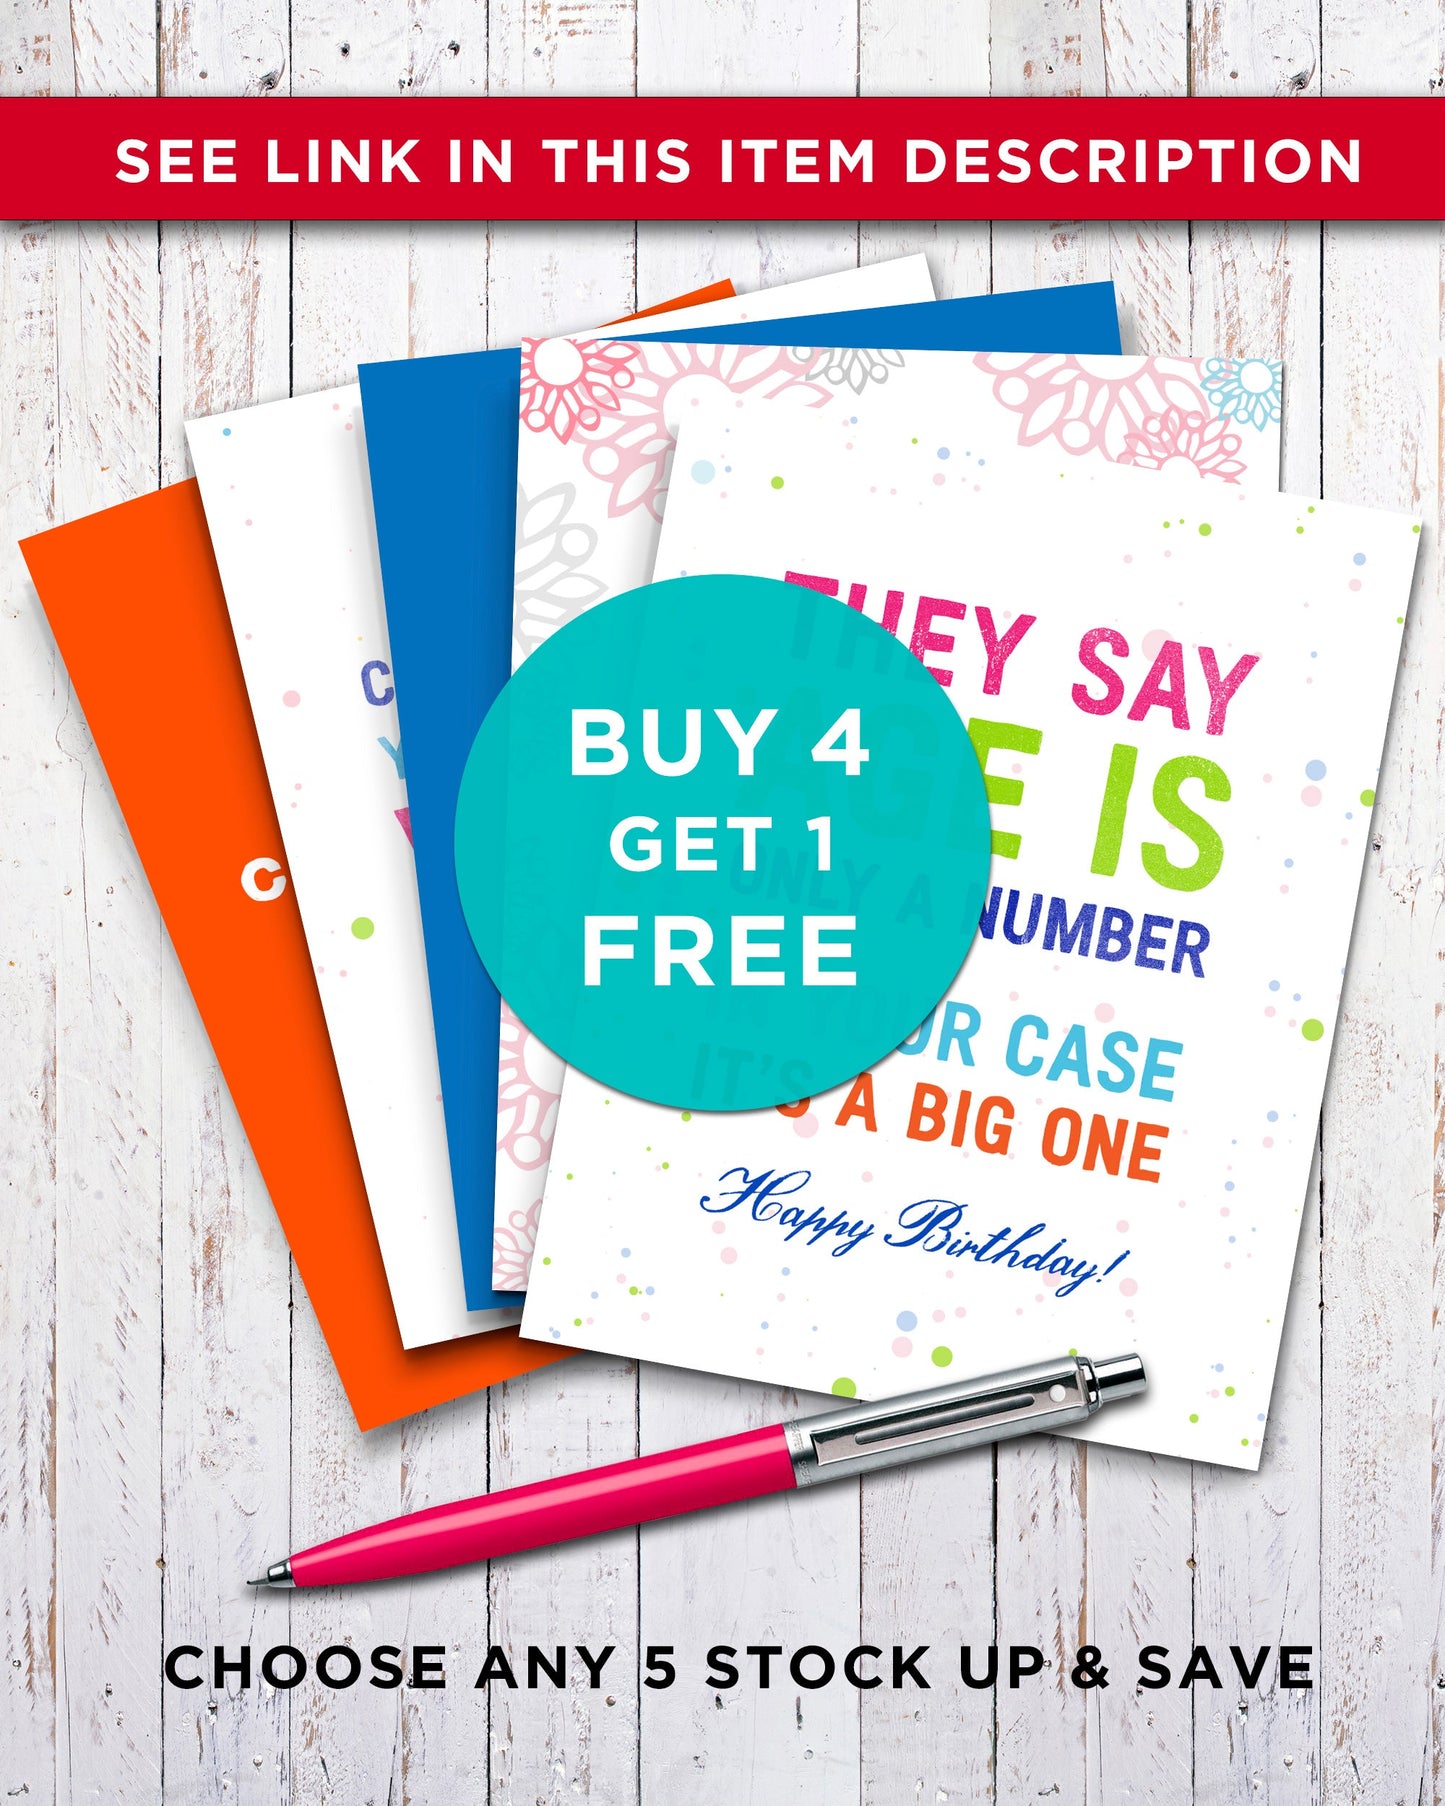 Greeting card deals from Transit Design, Buy 4 get 1 free